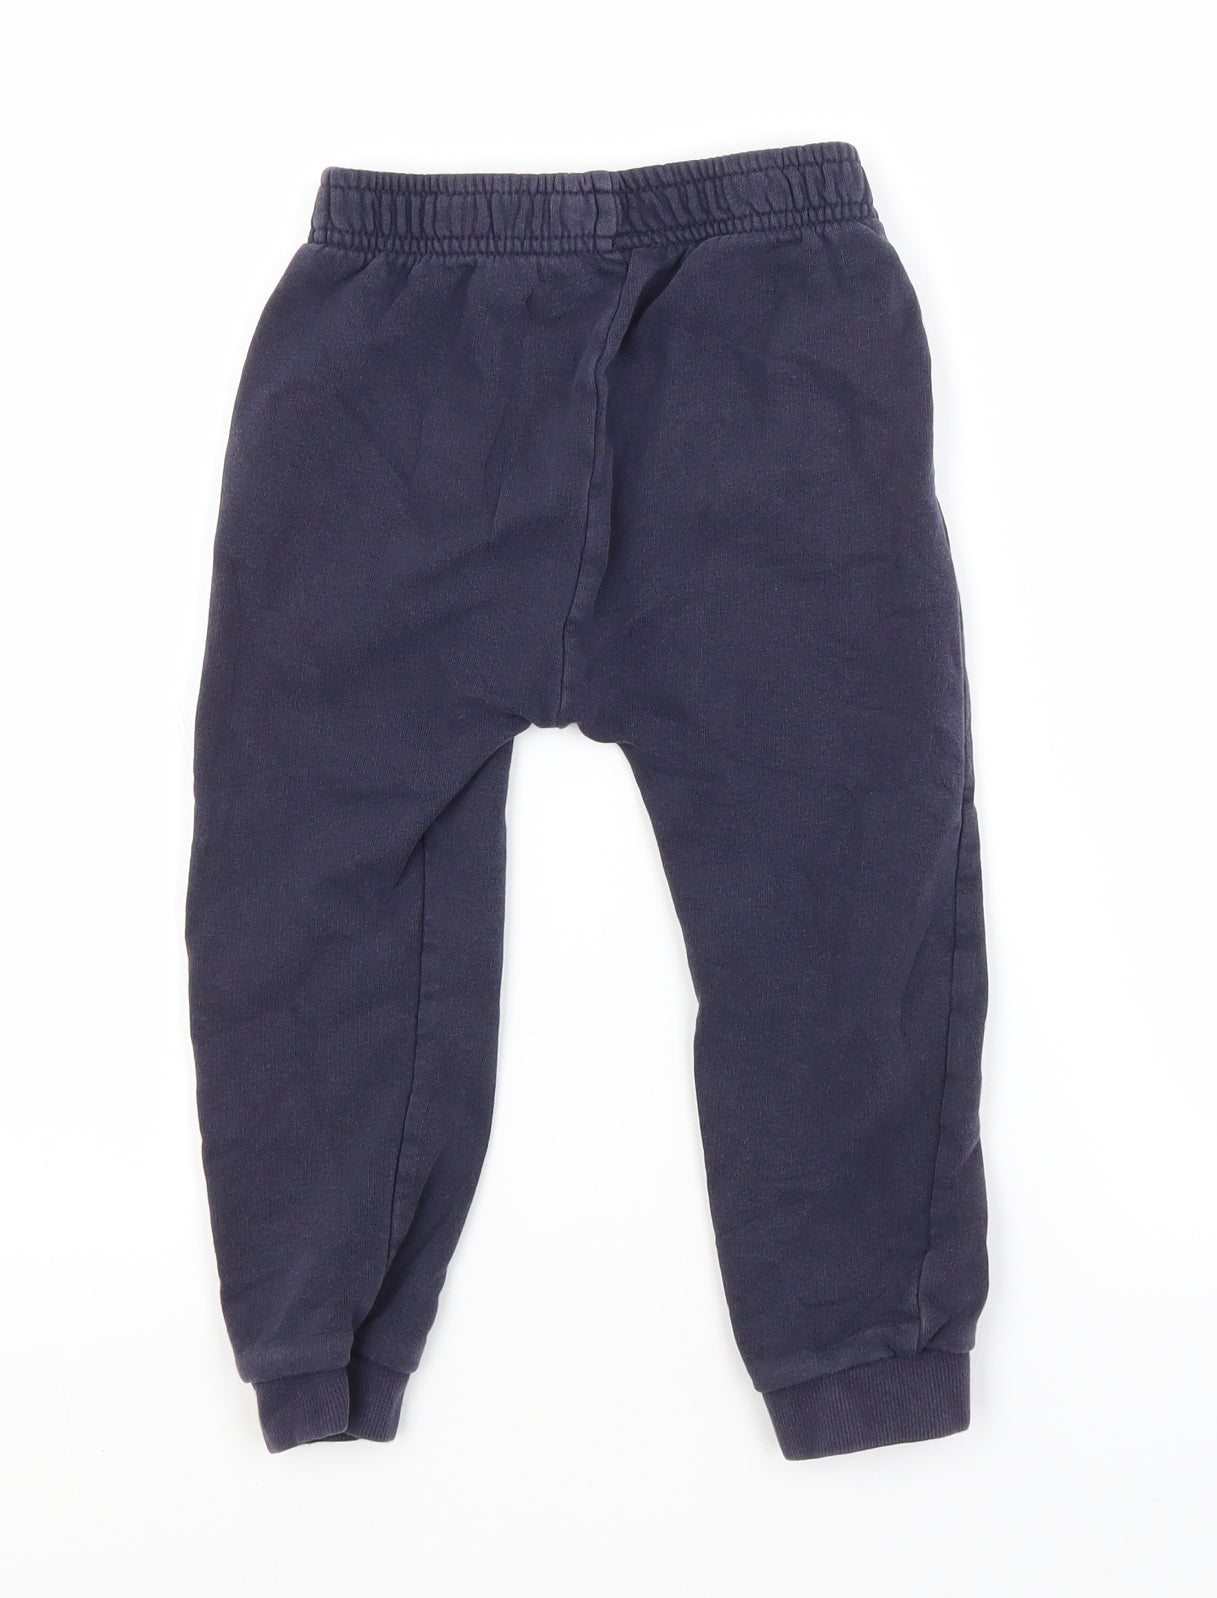 George Boys Blue  Cotton Sweatpants Trousers Size 3-4 Years  Regular